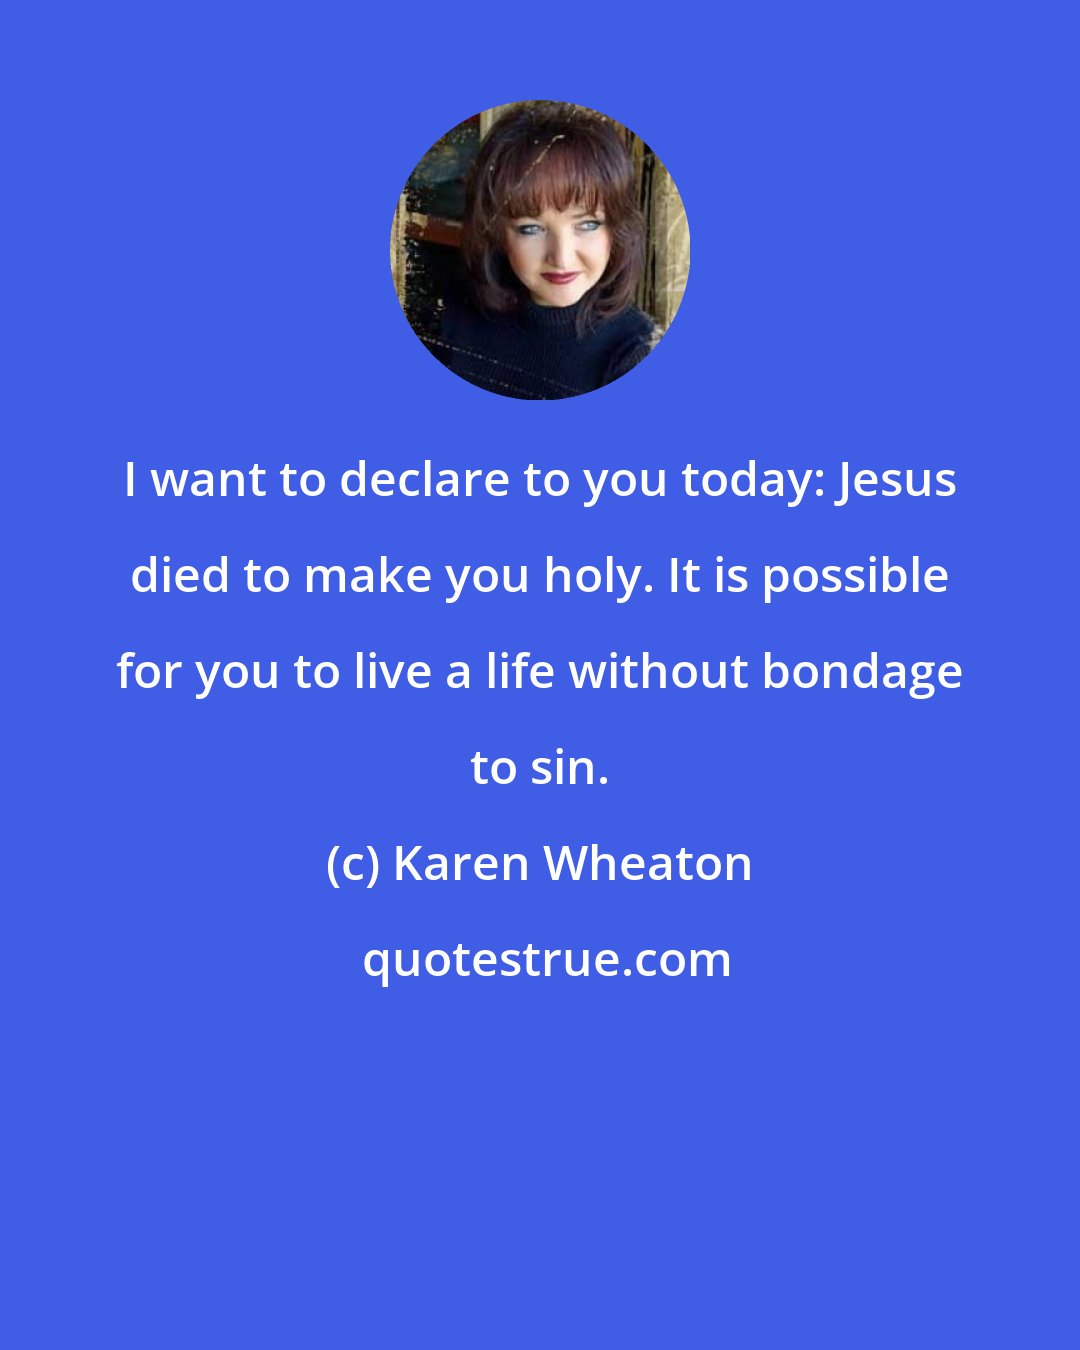 Karen Wheaton: I want to declare to you today: Jesus died to make you holy. It is possible for you to live a life without bondage to sin.